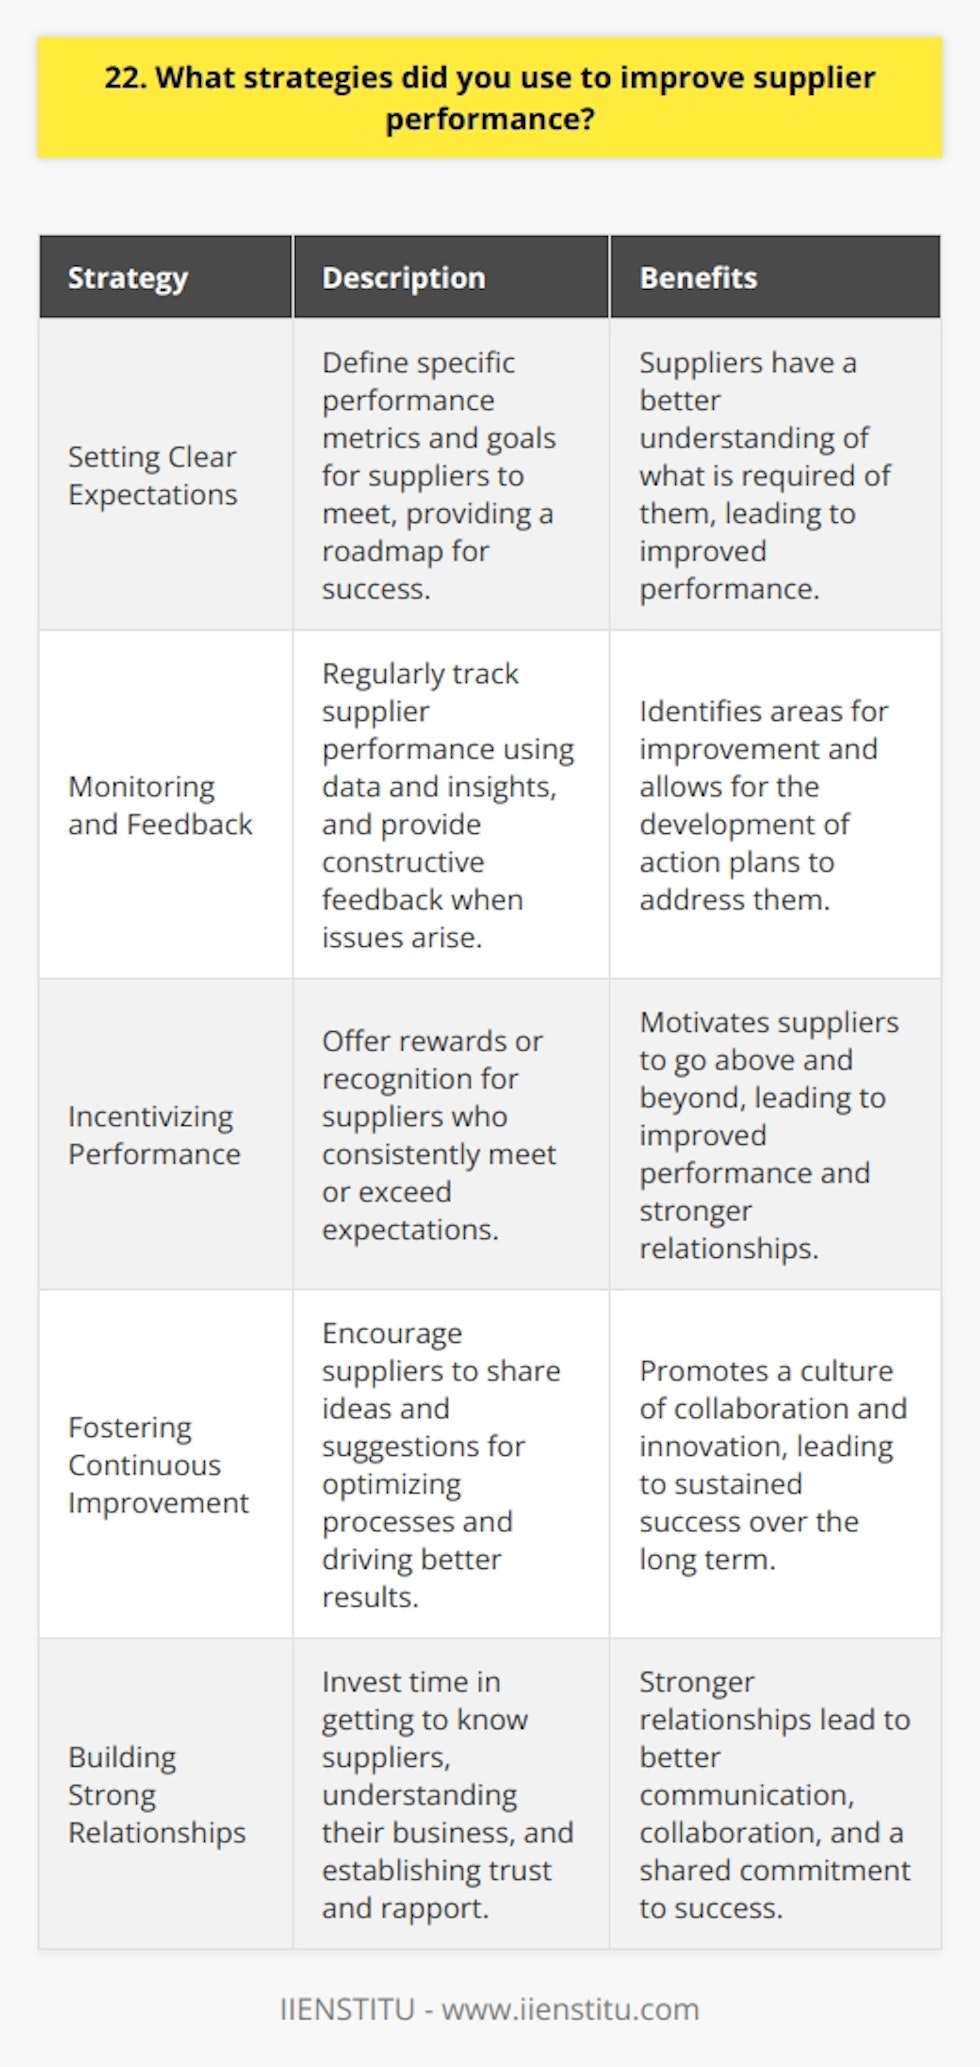 When it comes to improving supplier performance, Ive found that clear communication and collaboration are key. By establishing open lines of dialogue with suppliers, Im able to better understand their challenges and work together to find solutions. Setting Clear Expectations One strategy Ive used is setting clear expectations from the outset. This involves defining specific performance metrics and goals that suppliers need to meet. By providing a roadmap for success, suppliers have a better understanding of whats required of them. Monitoring and Feedback Regular monitoring and feedback are also crucial. I make it a point to track supplier performance on an ongoing basis, using data and insights to identify areas for improvement. When issues arise, I provide constructive feedback and work with suppliers to develop action plans for addressing them. Incentivizing Performance Another approach Ive found effective is incentivizing strong performance. By offering rewards or recognition for suppliers who consistently meet or exceed expectations, Im able to motivate them to go above and beyond. This could be anything from preferred vendor status to additional business opportunities. Continuous Improvement Finally, I believe in fostering a culture of continuous improvement. I encourage suppliers to share their ideas and suggestions for how we can optimize our processes and drive better results. By working together to identify and implement improvements, were able to achieve sustained success over the long term.